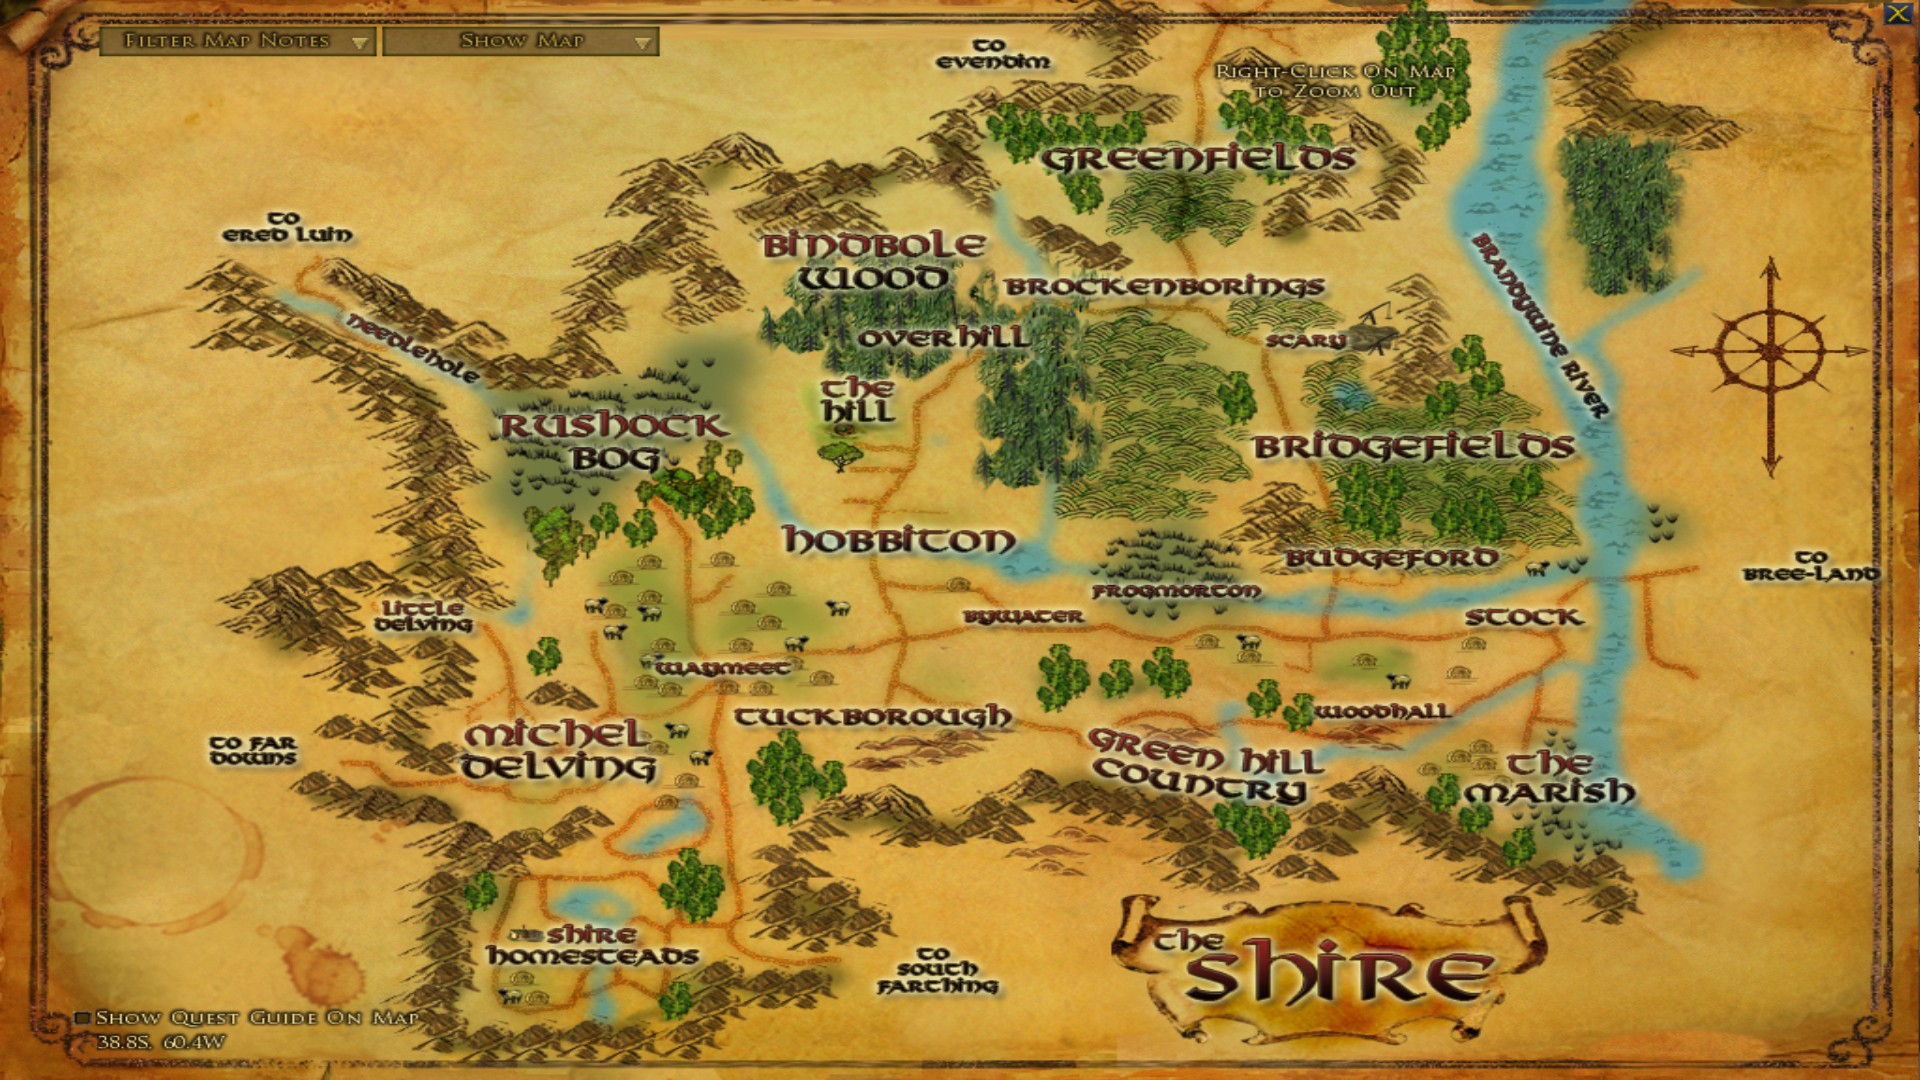 Image: Map of the Shire